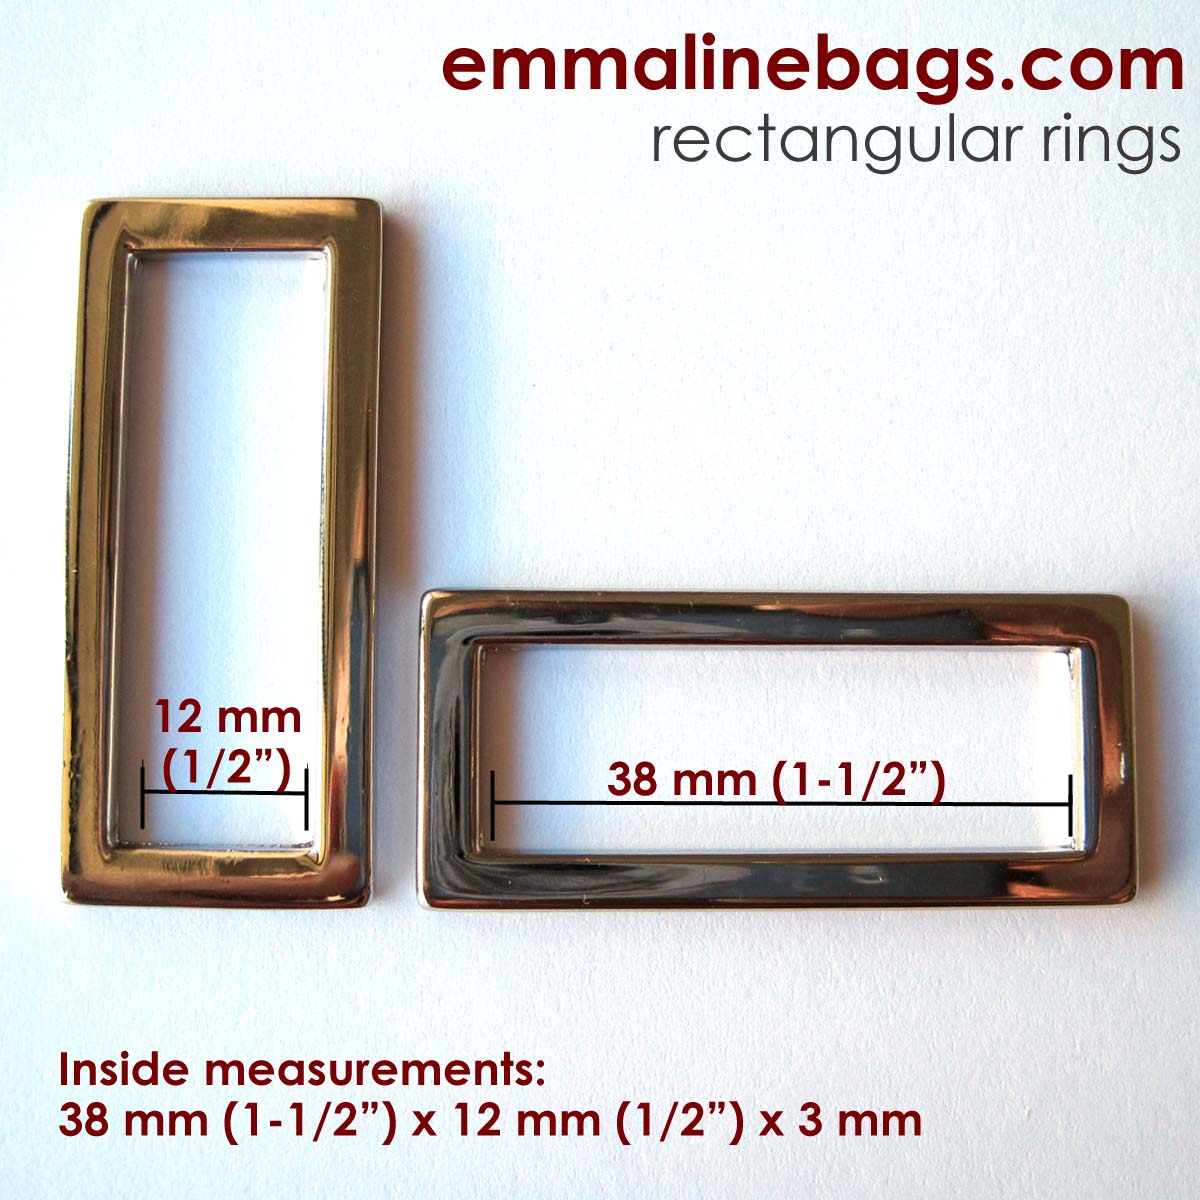 Emmaline Bags: Sewing Patterns and Purse Supplies: More Bag Making Supplies/Hardware in the Shop!